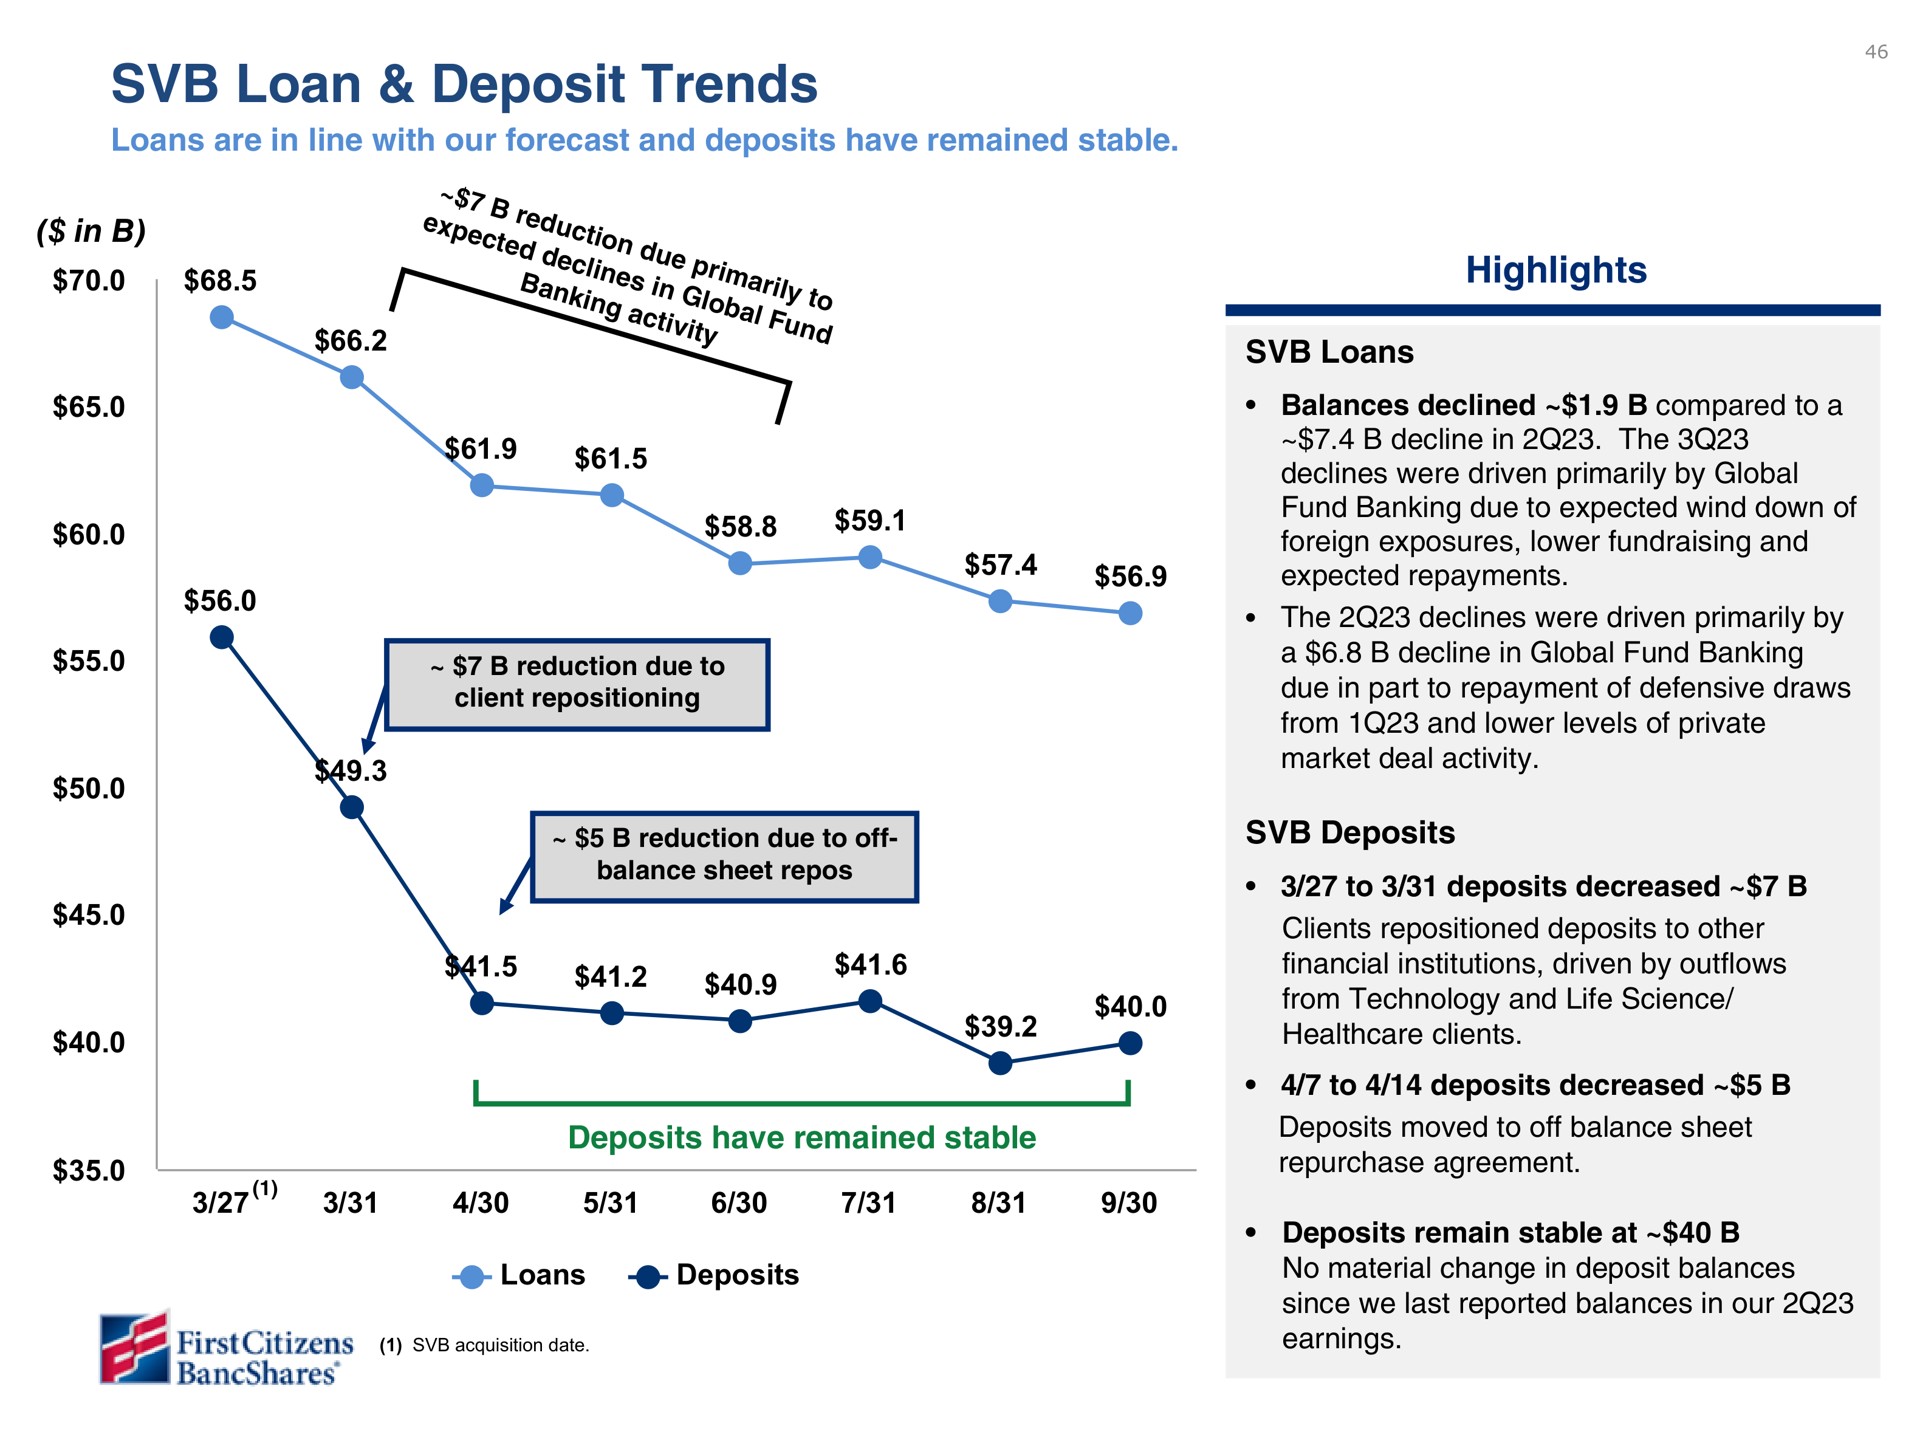 loan deposit trends highlights in bang in to | First Citizens BancShares